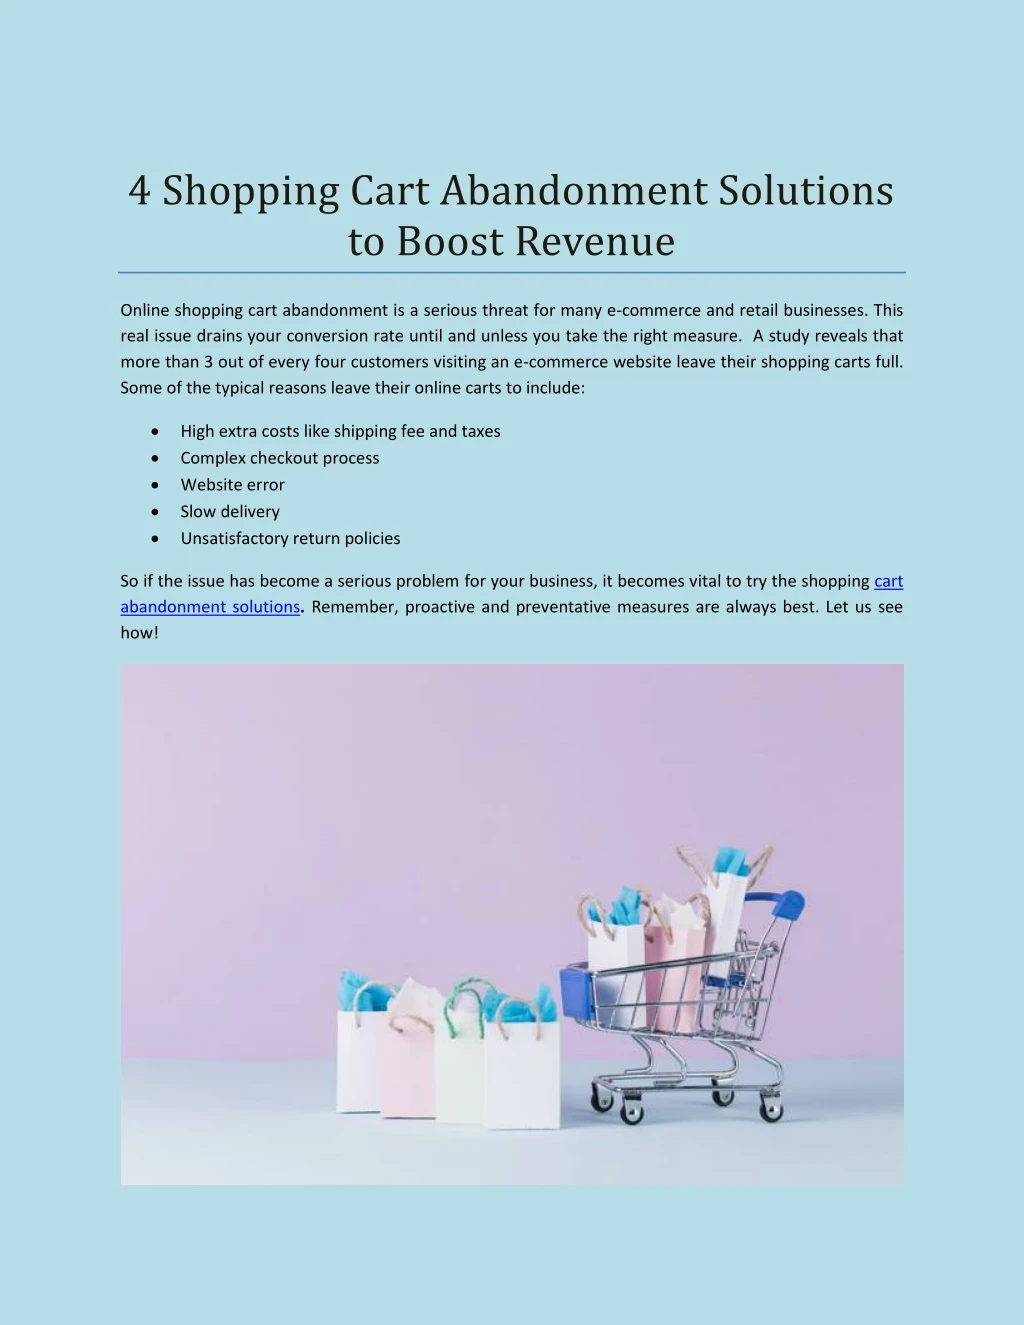 4 shopping cart abandonment solutions to boost